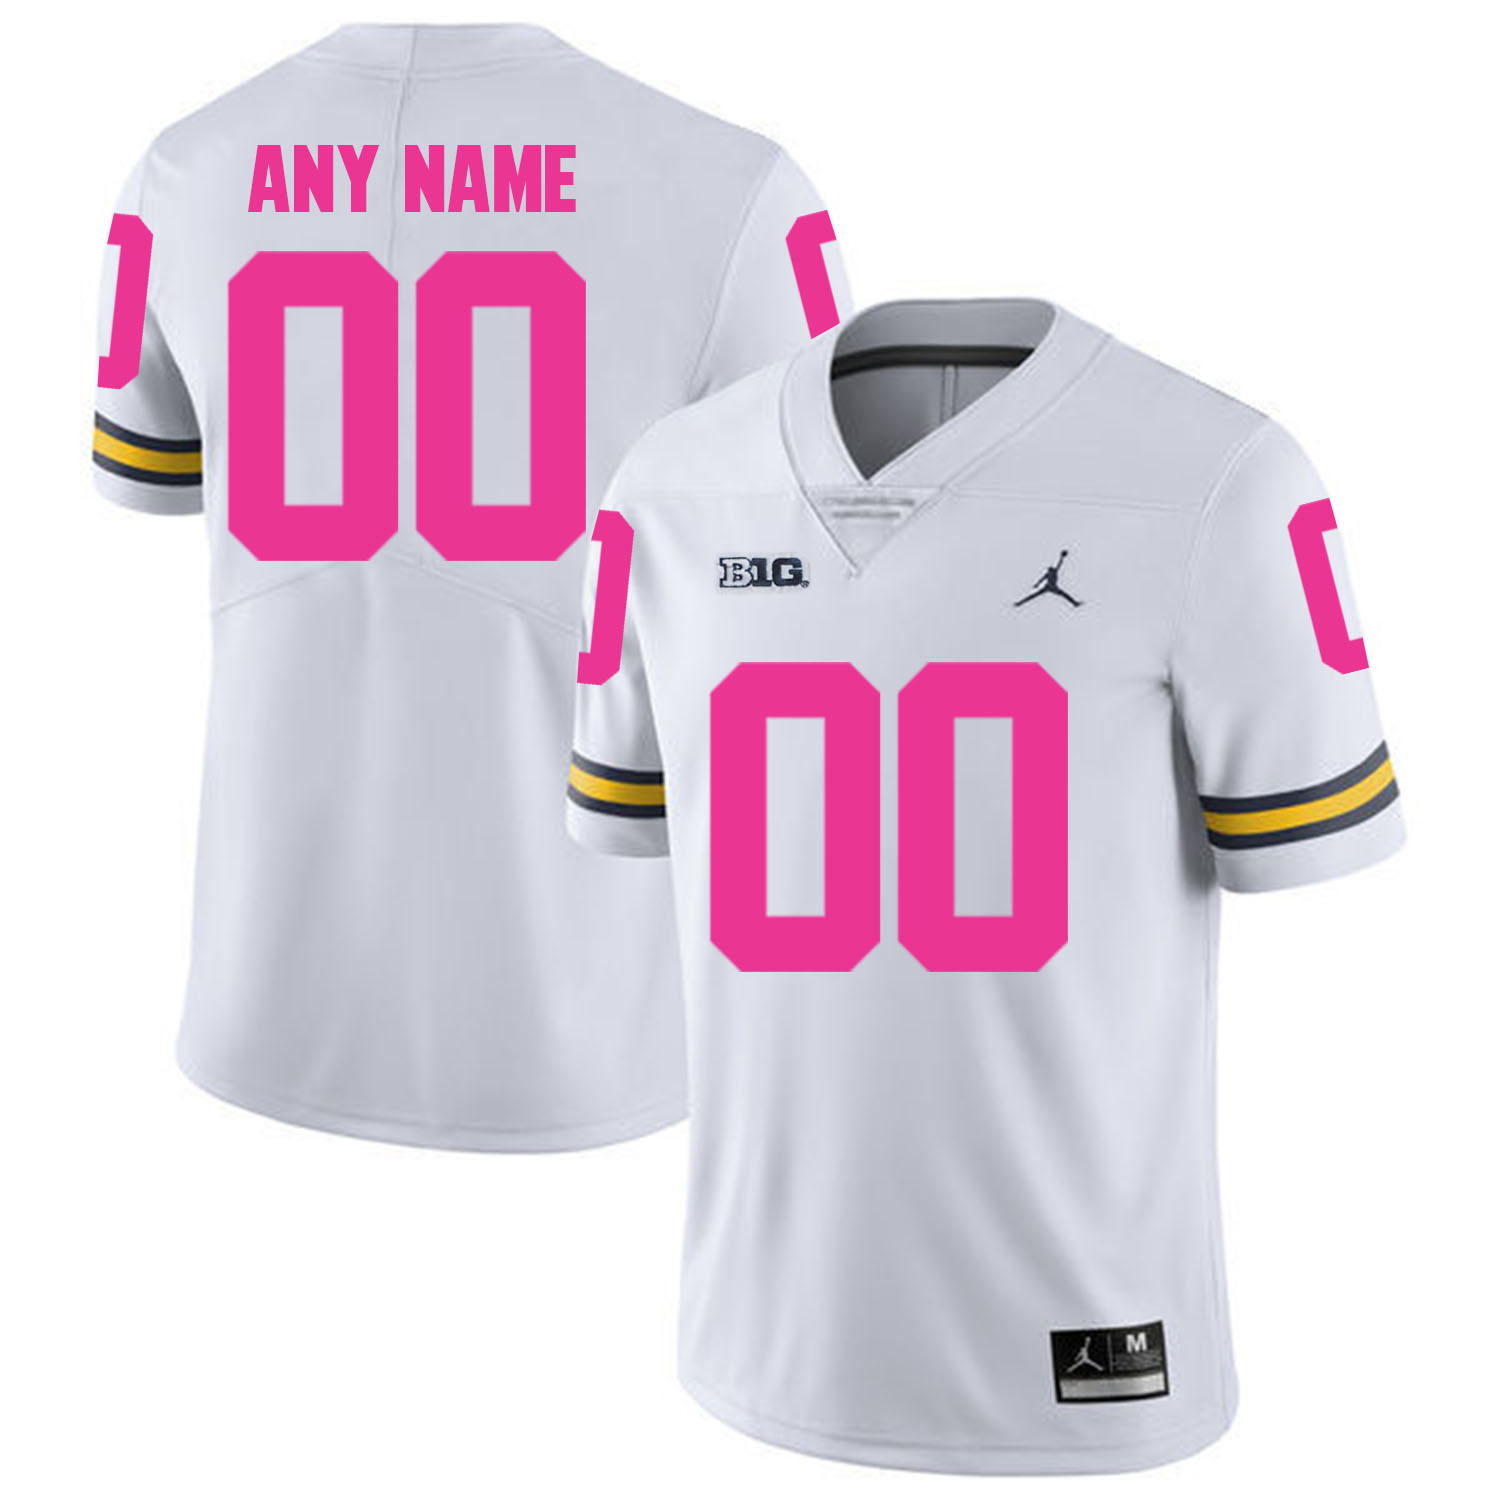 Michigan Wolverines White Men's Customized 2018 Breast Cancer Awareness College Football Jersey